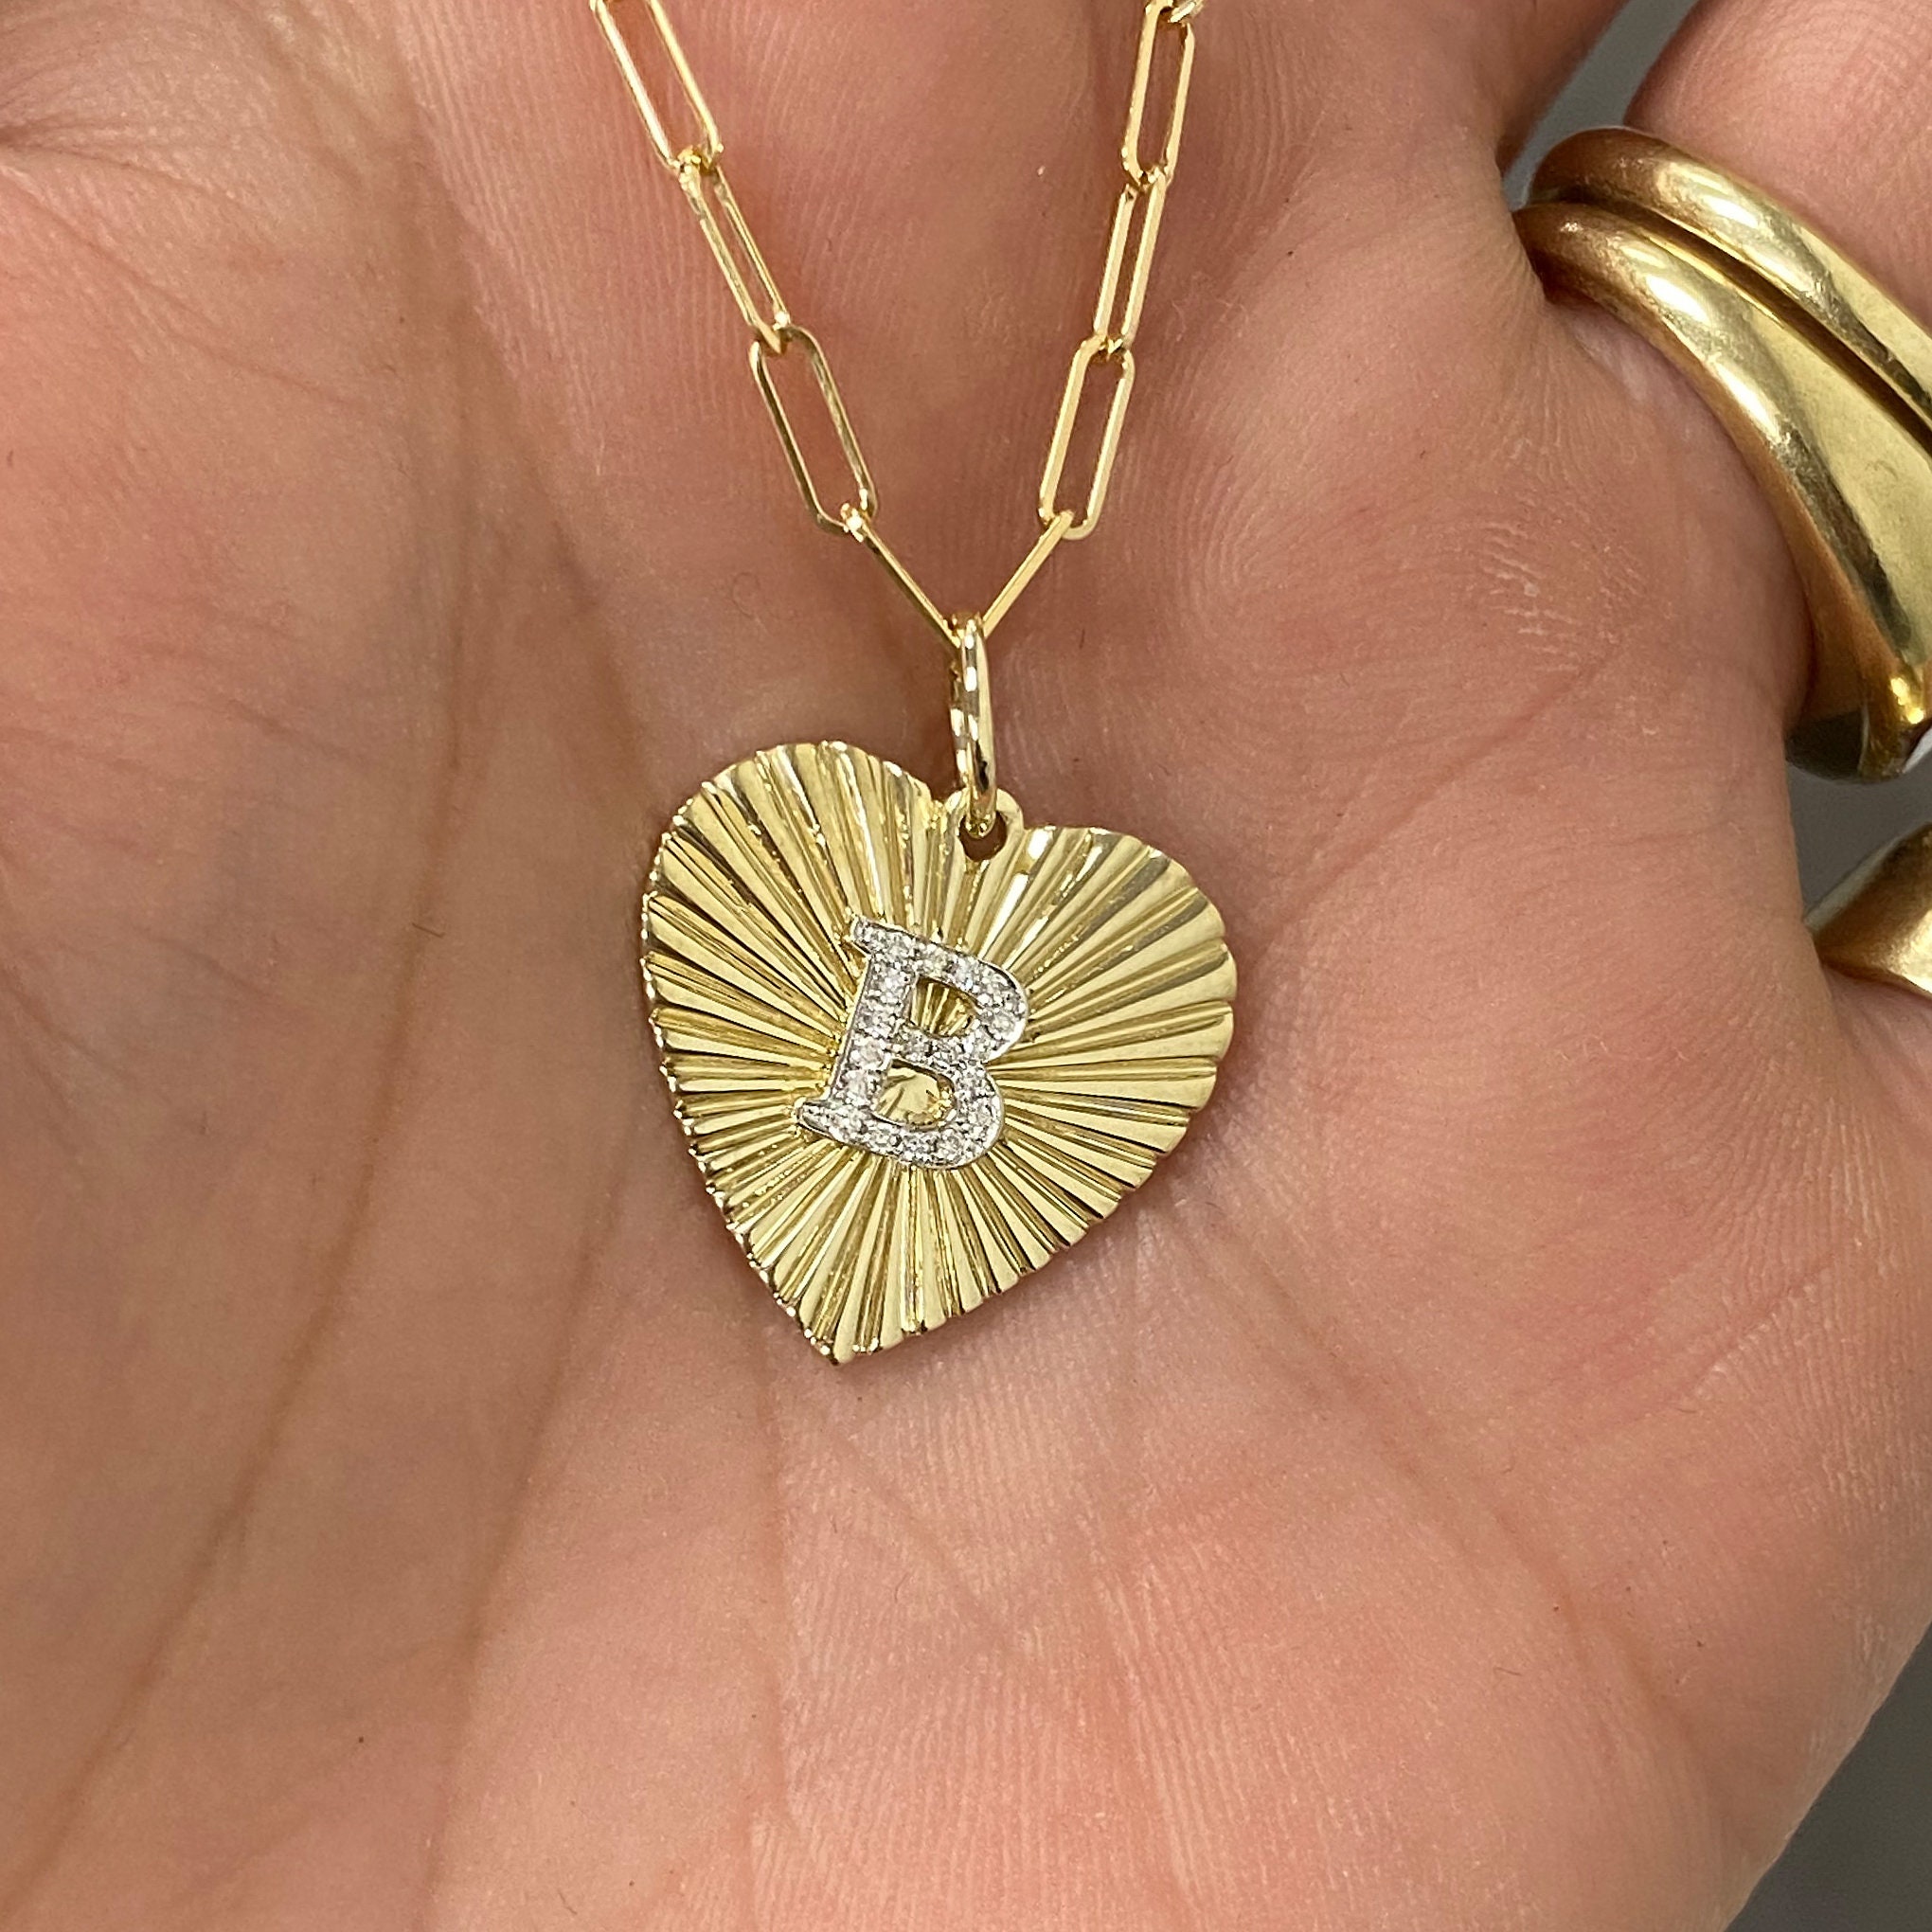 14K Solid Gold Fluted Heart Charm Necklace (Sunbeam Sunburst Style Fluted Detail Heart Pendant with Thin Paperclip Chain or Charm Alone)